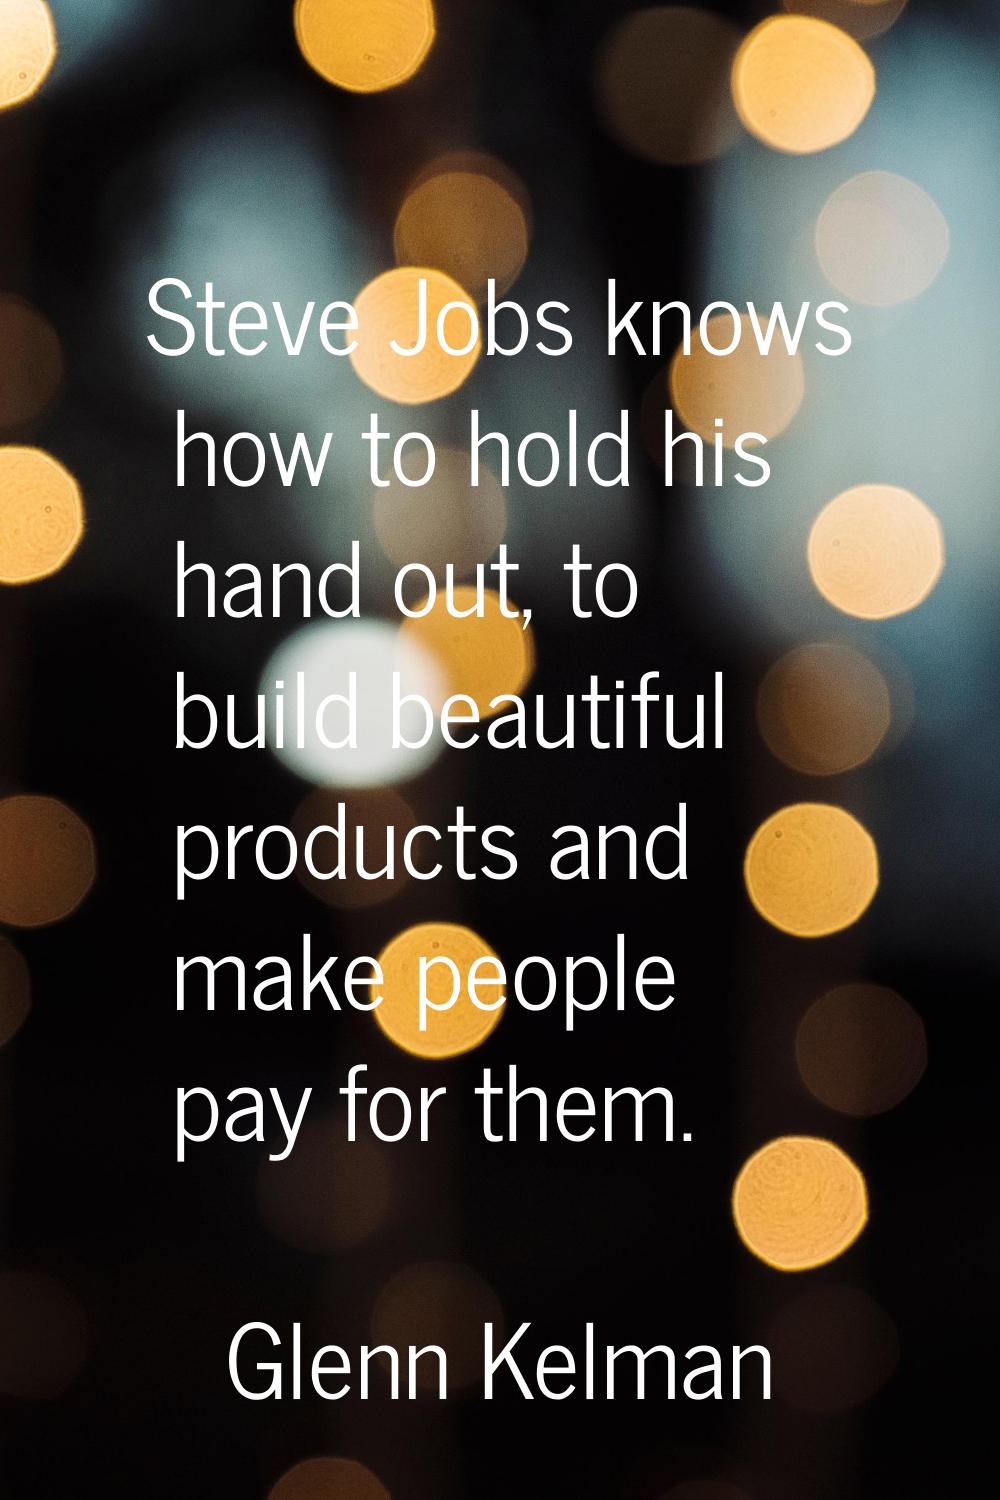 Steve Jobs knows how to hold his hand out, to build beautiful products and make people pay for them